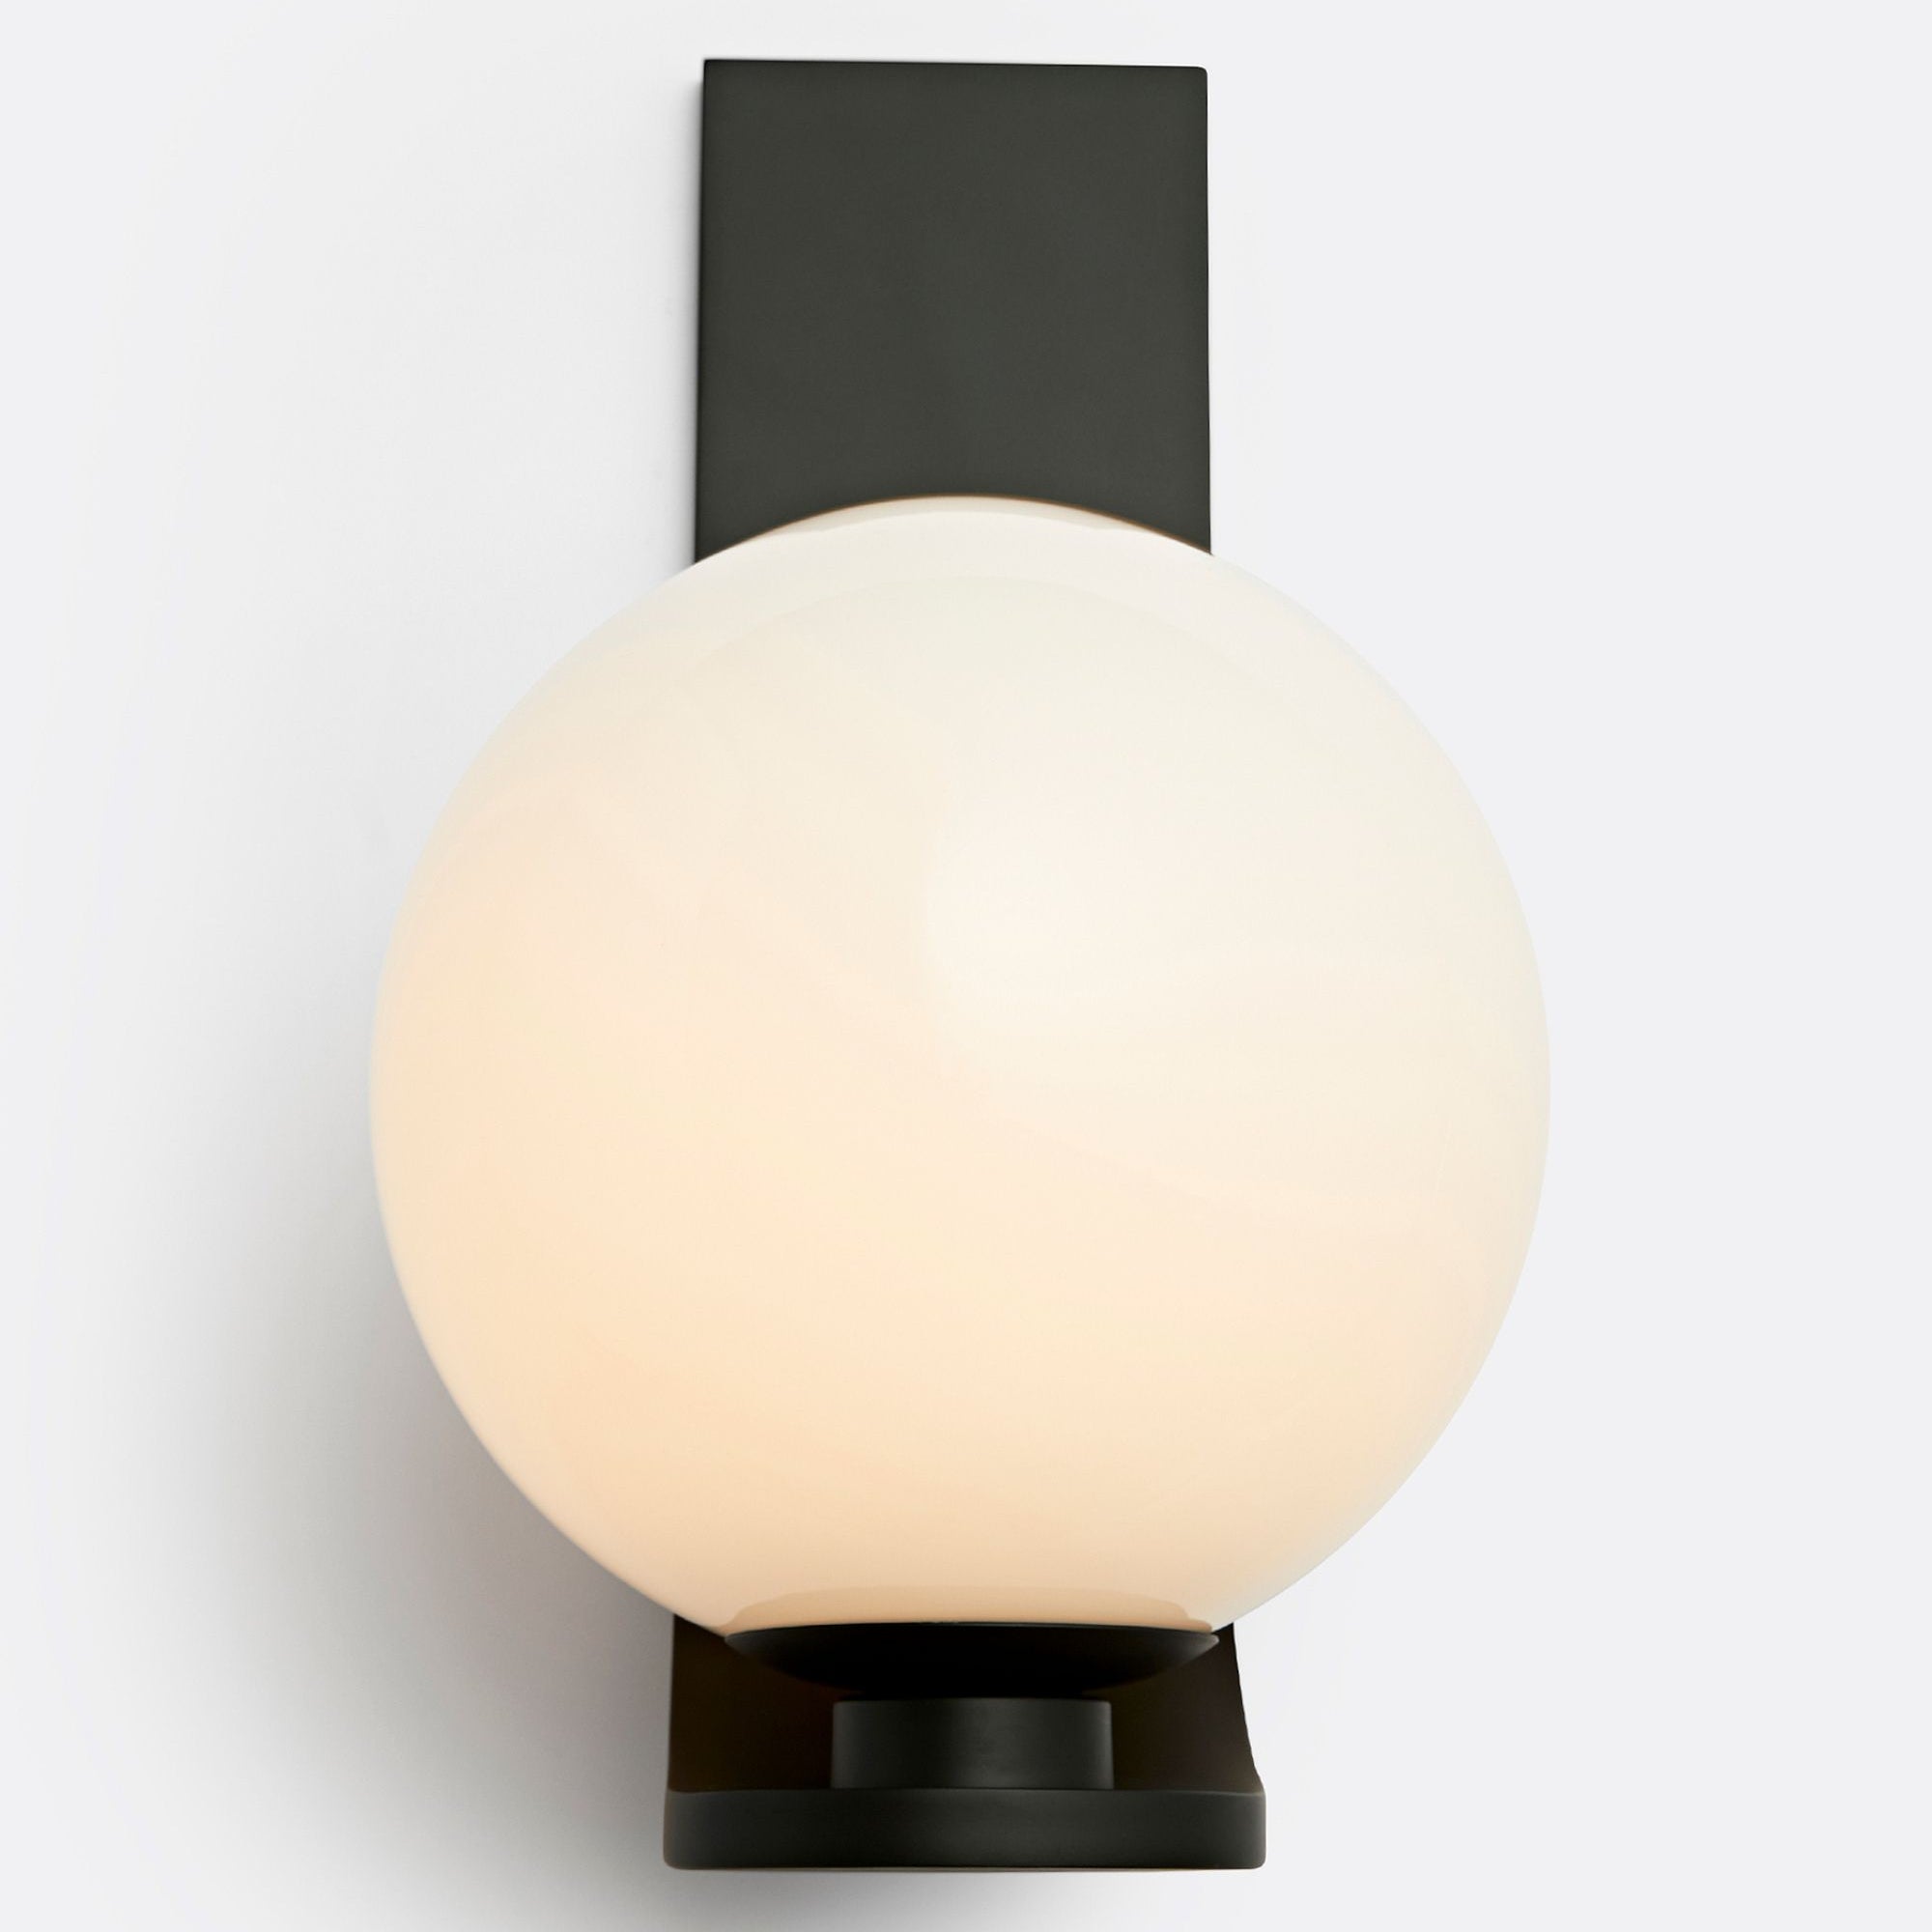 Modern Art Deco Globe Sconce - Minimalist Style with Curvilinear Base and Globe Shade in a Steel Wall Sconce for Outdoor